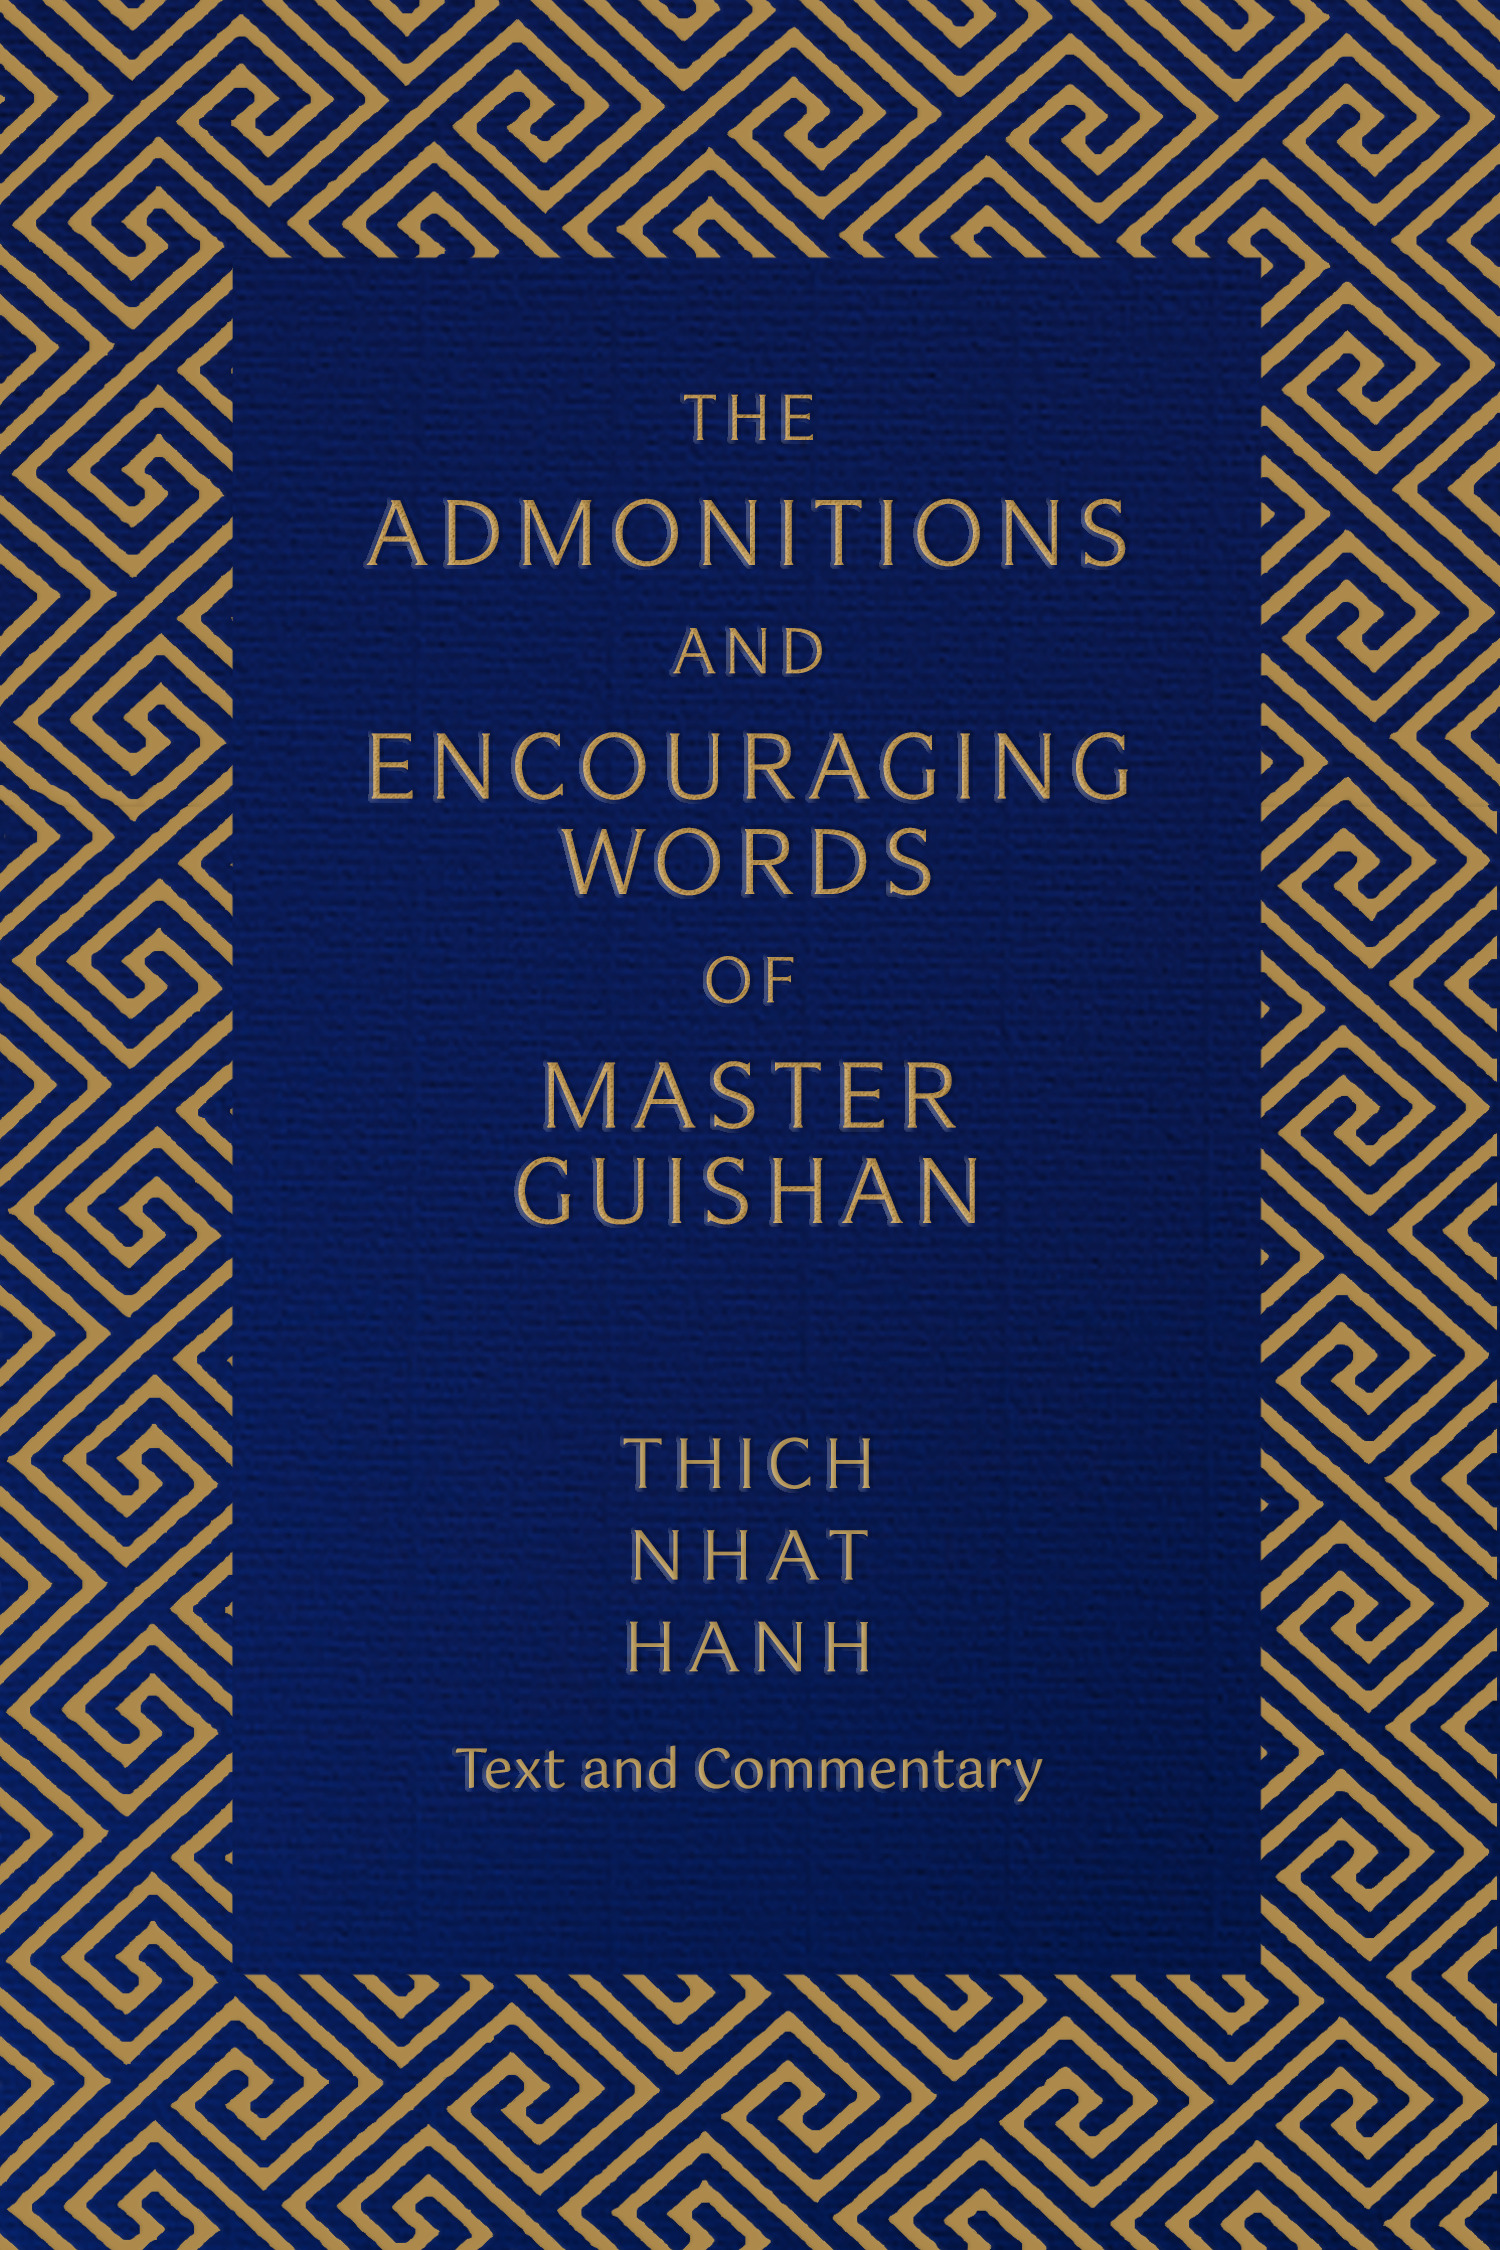 The Admonitions and Encouraging Words of Master Guishan : Text and Commentary | Nhat Hanh, Thich